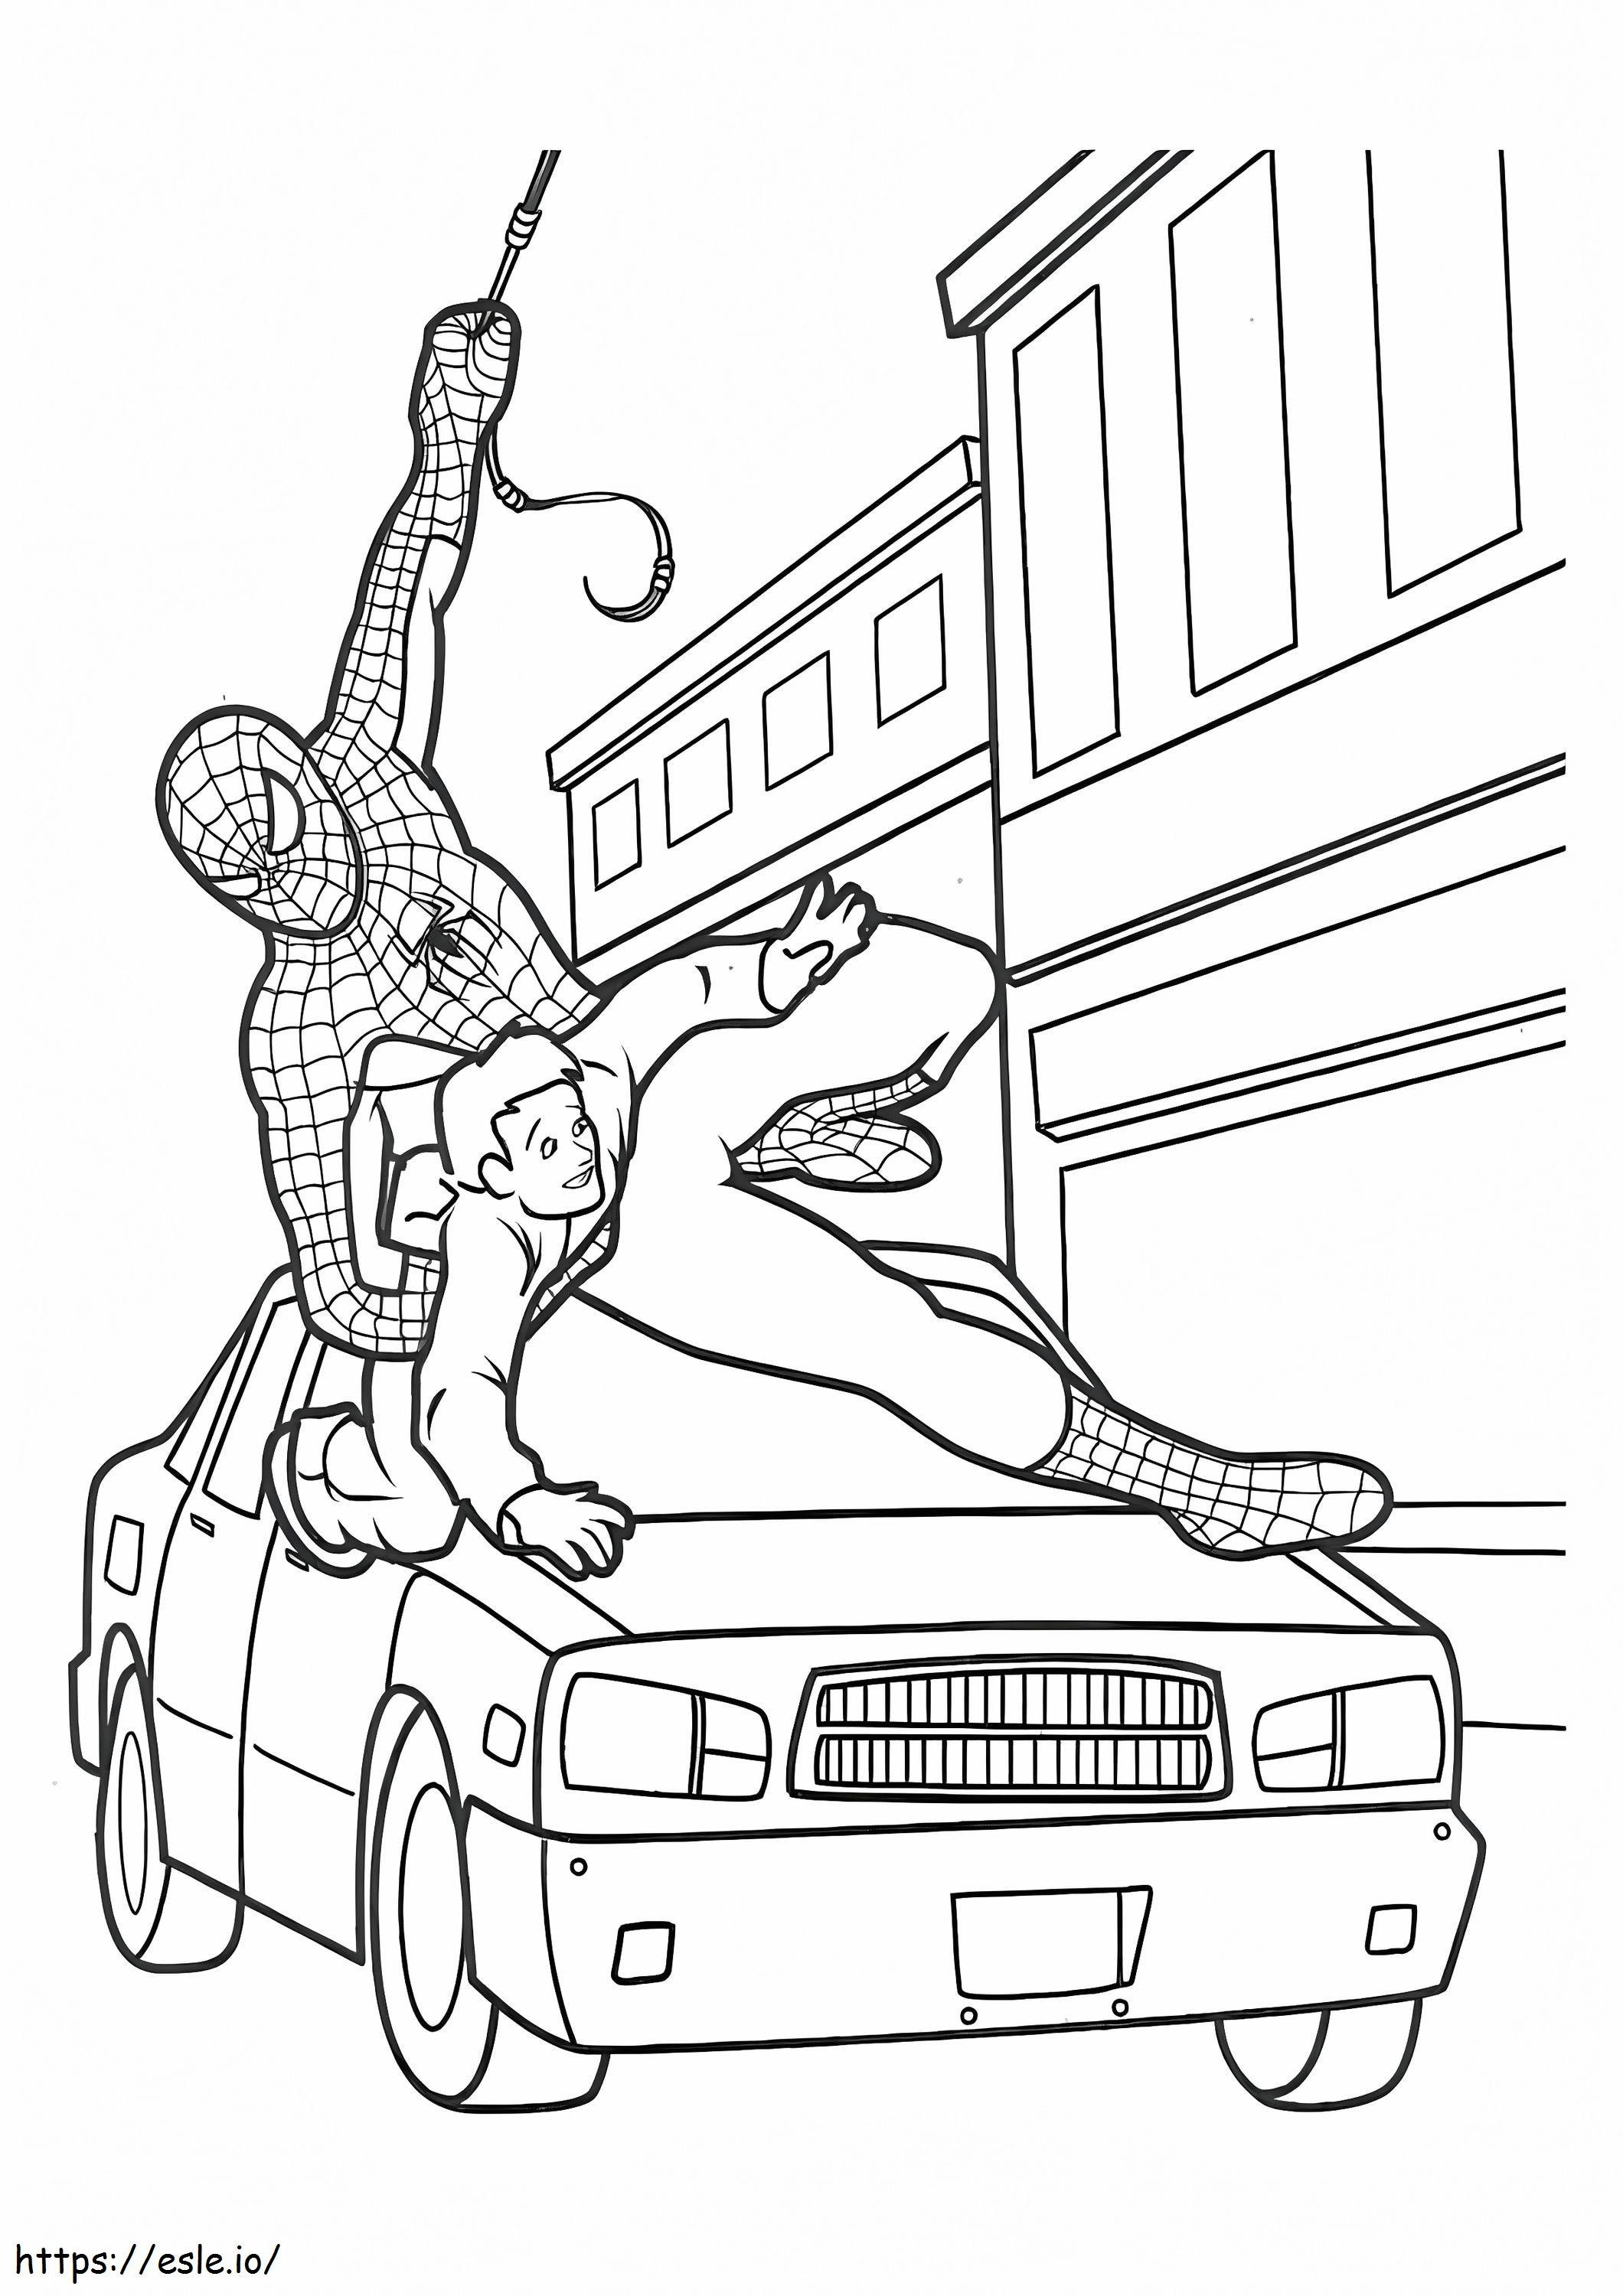 Spiderman Saves A Boy coloring page